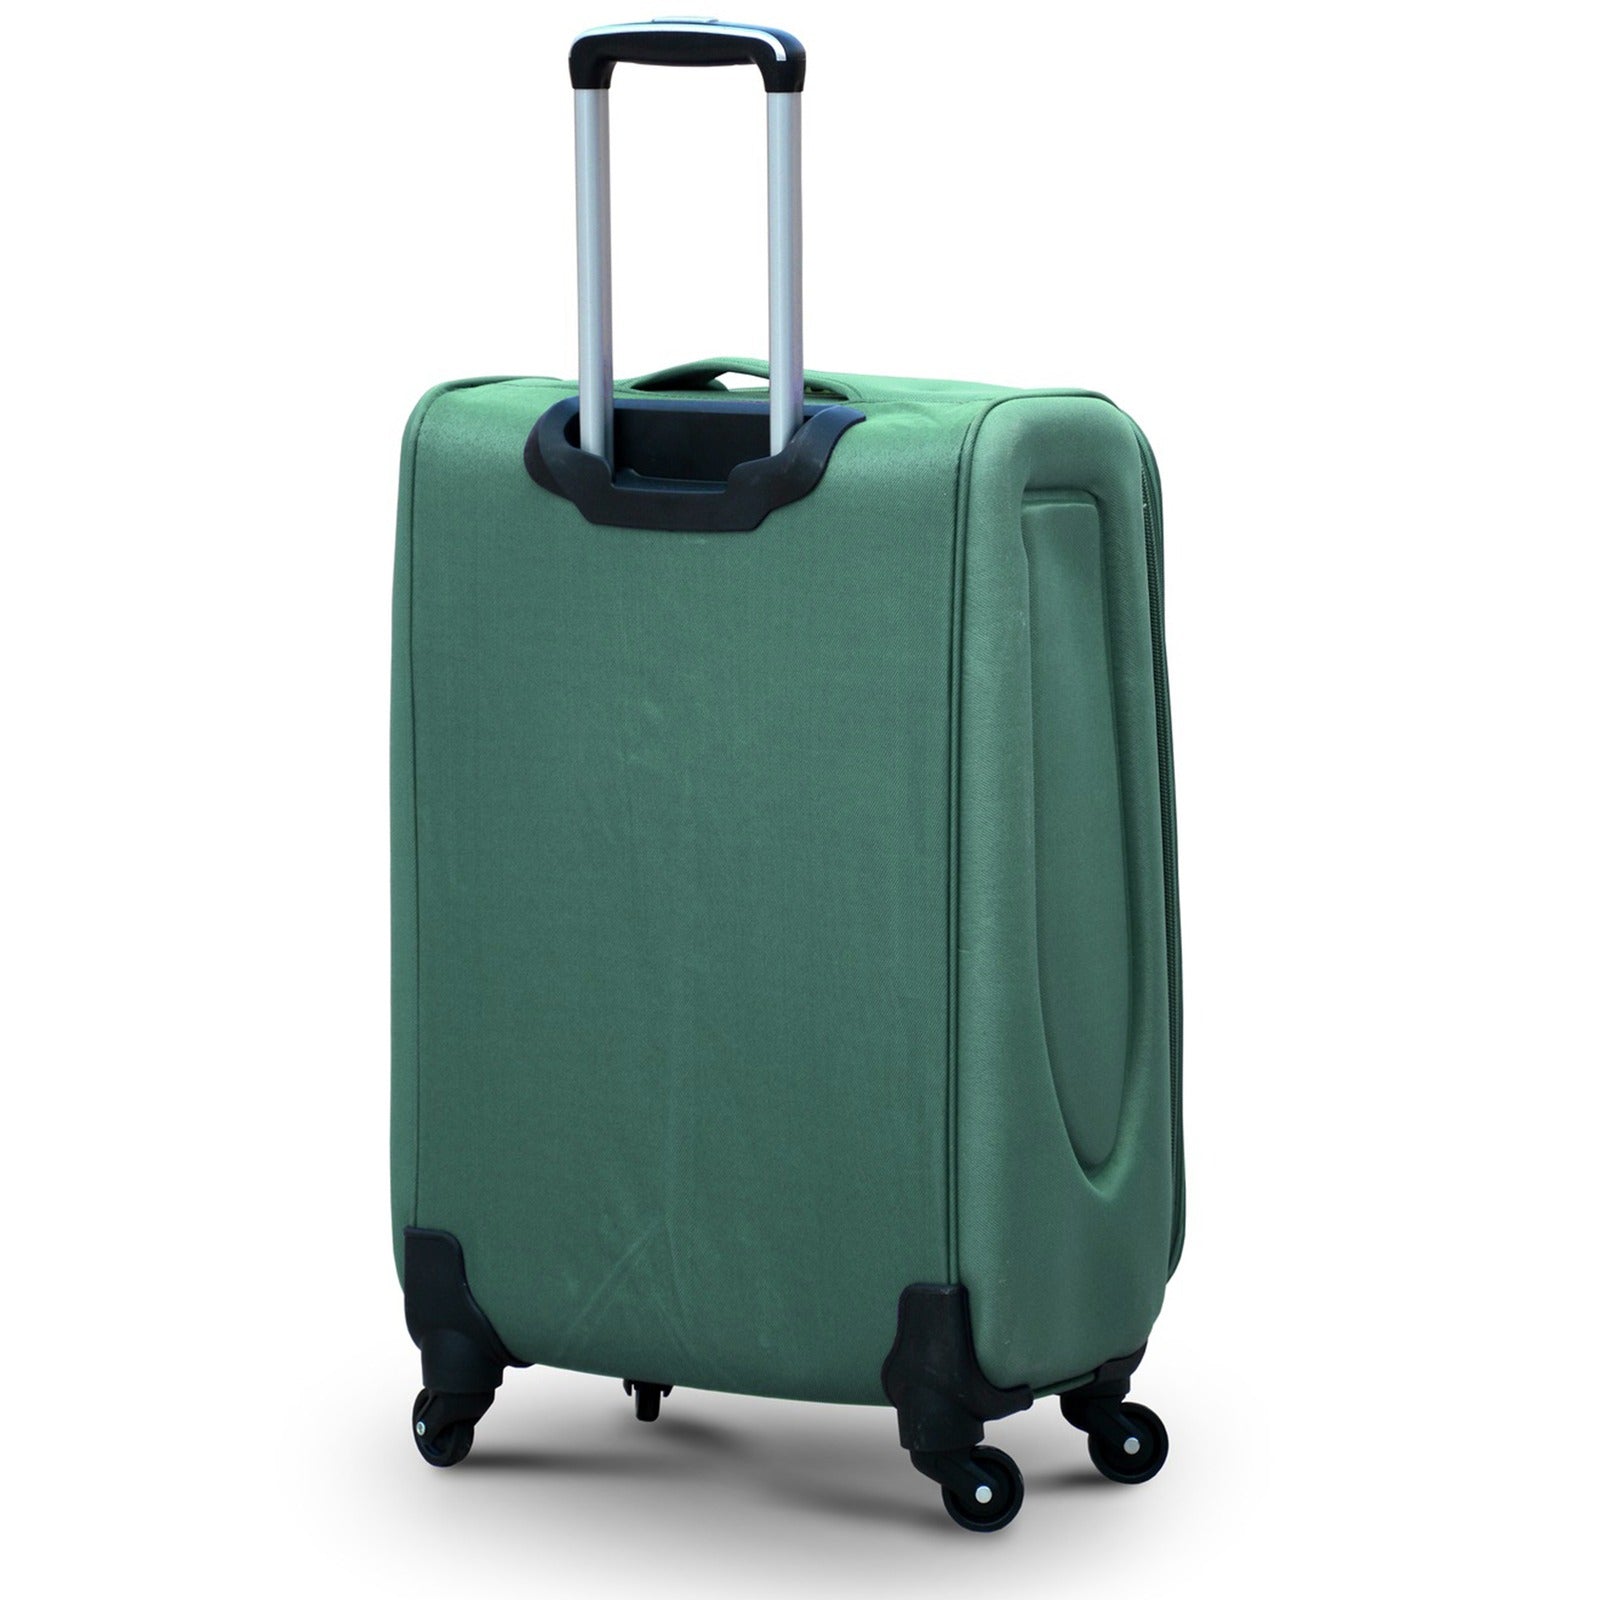 4 Piece Full Set 20" 24" 28" 32 Inches Green Colour SJ JIAN 4 Wheel Luggage Lightweight Soft Material Trolley Bag